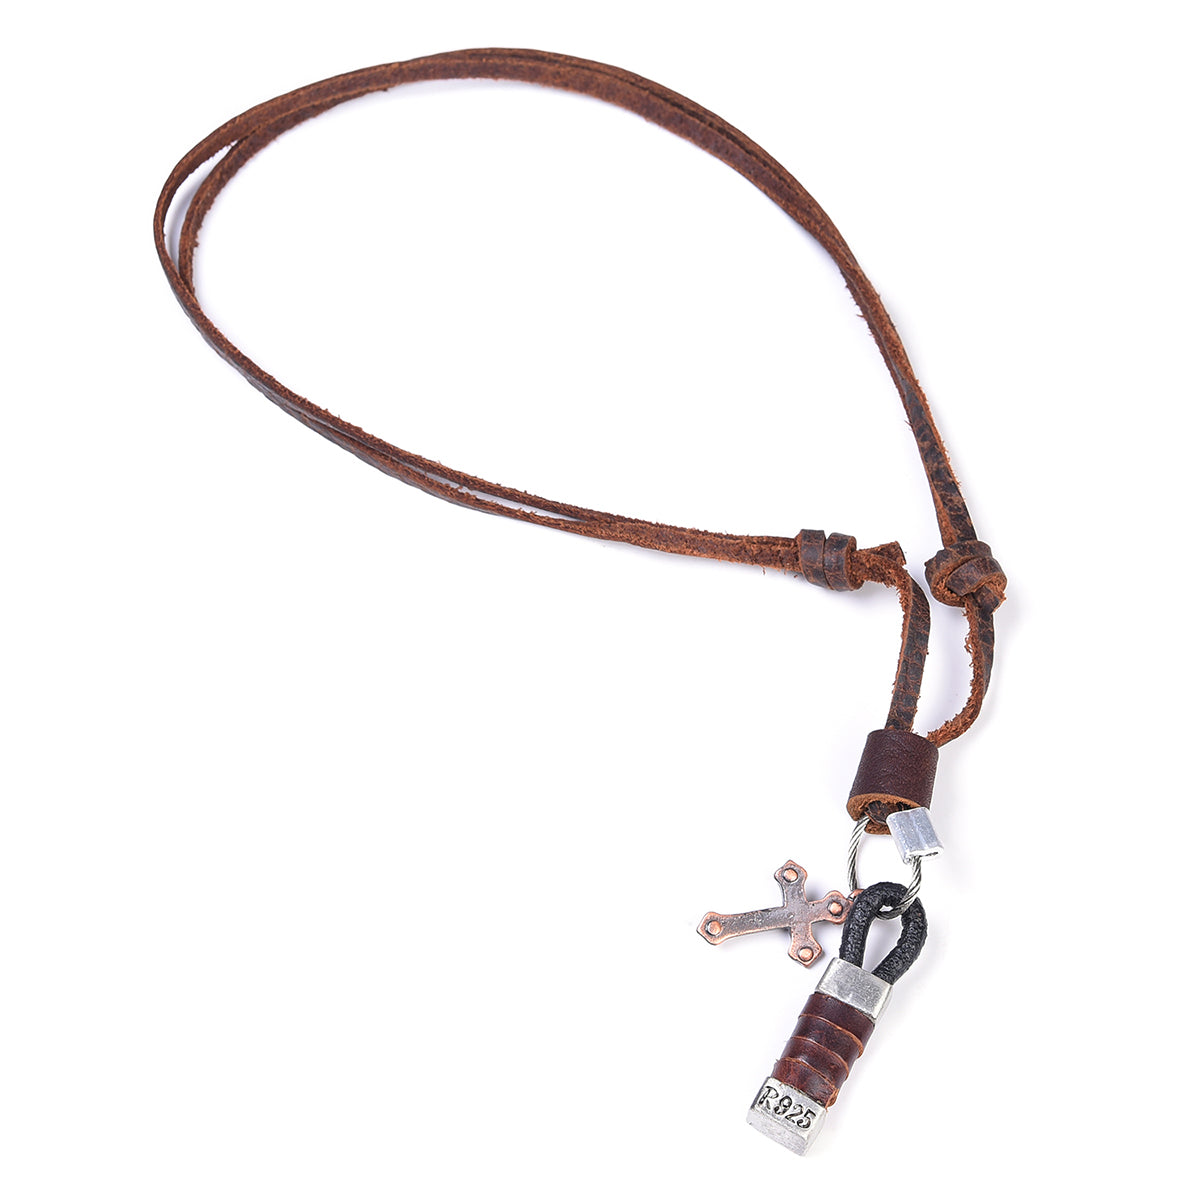 Leather Loop and Hook Necklace - Nicole Brayden Gifts